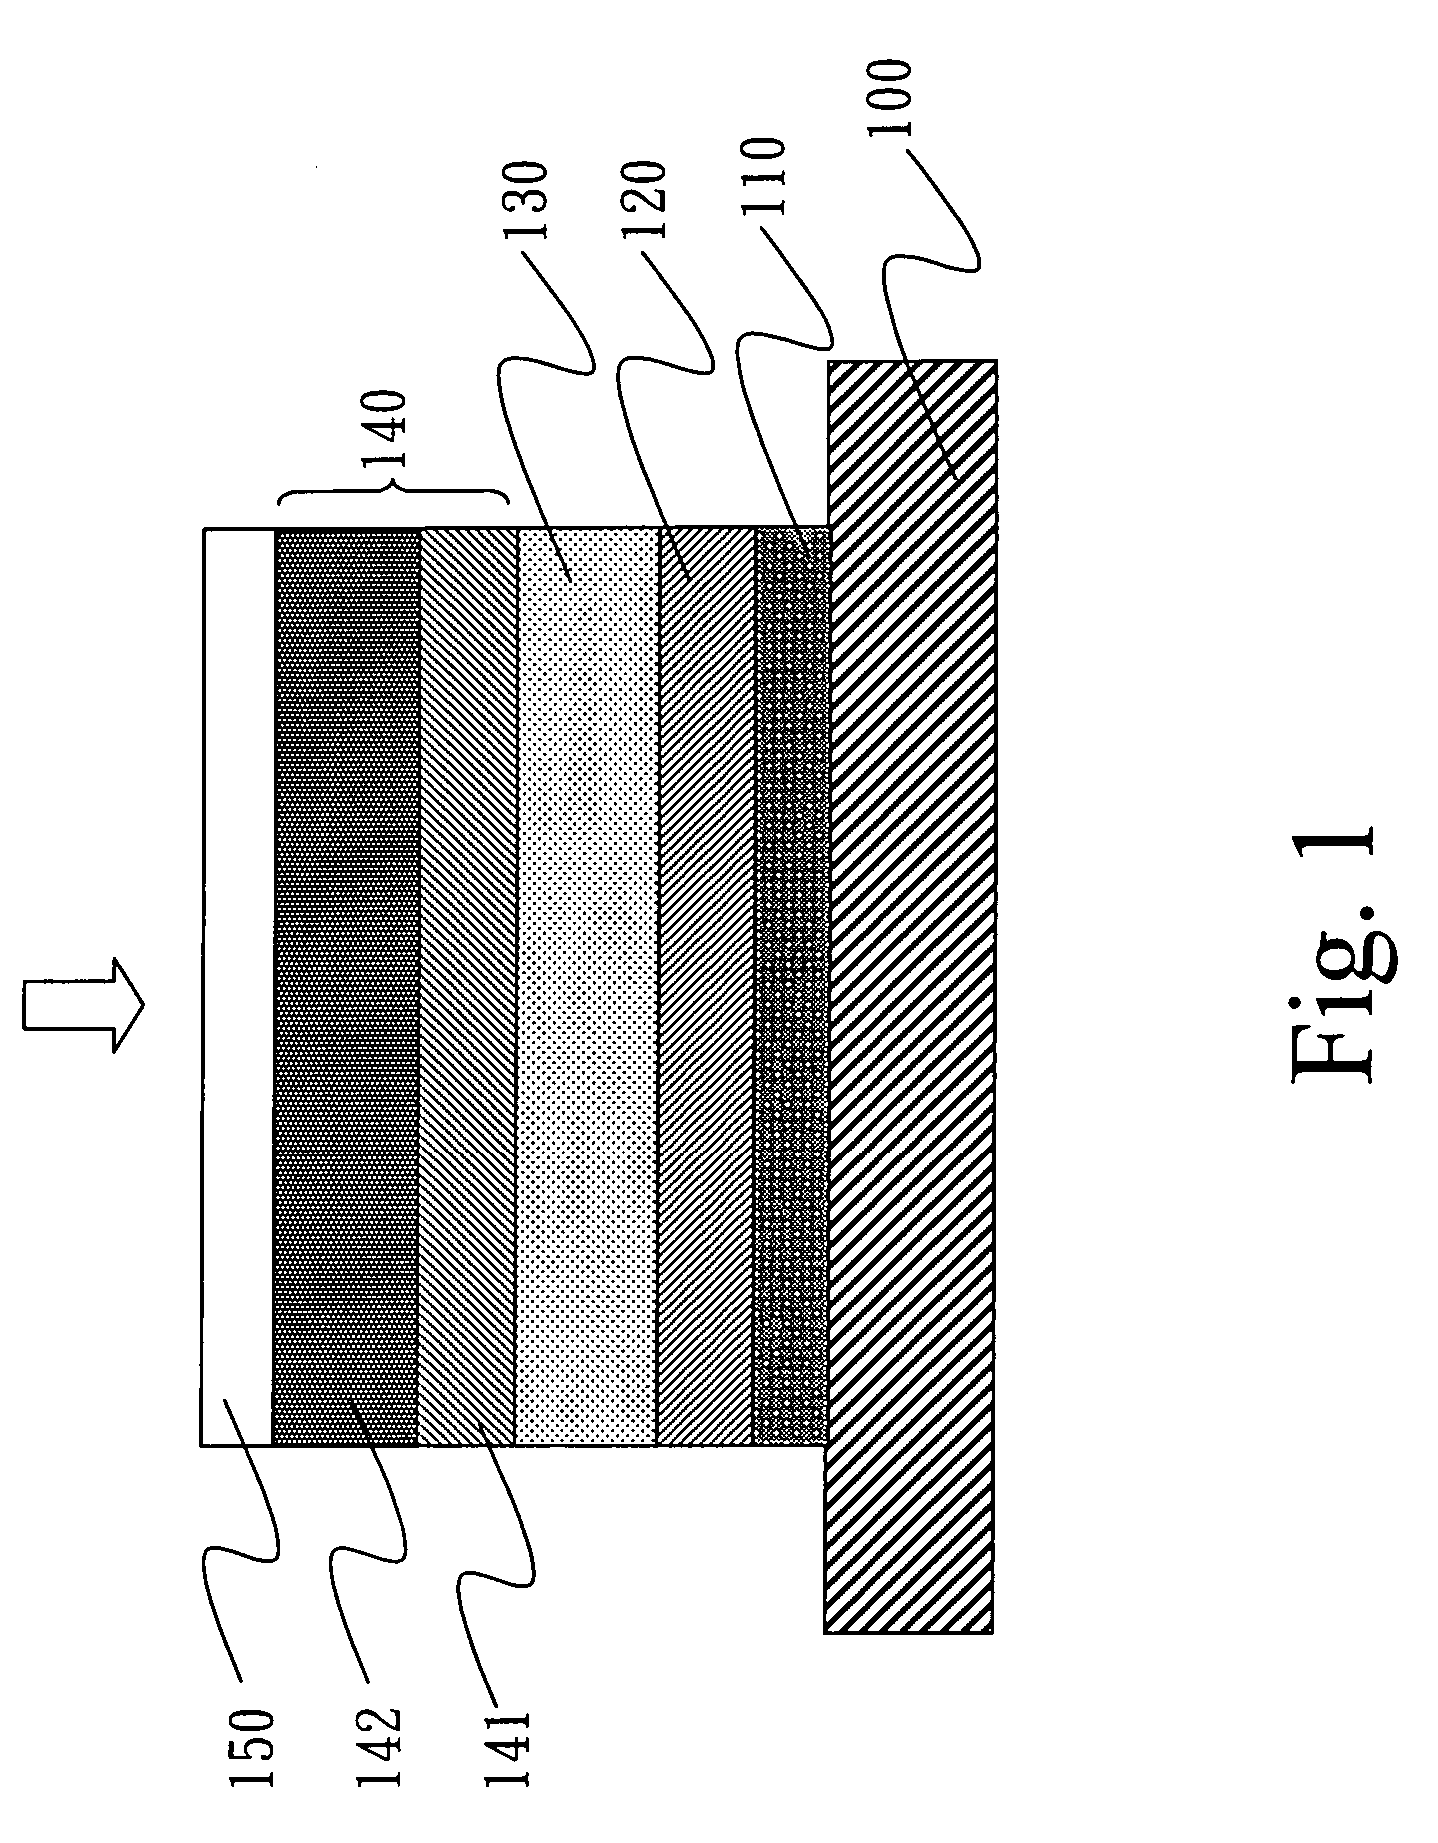 Magnetic field enhanced photovoltaic device